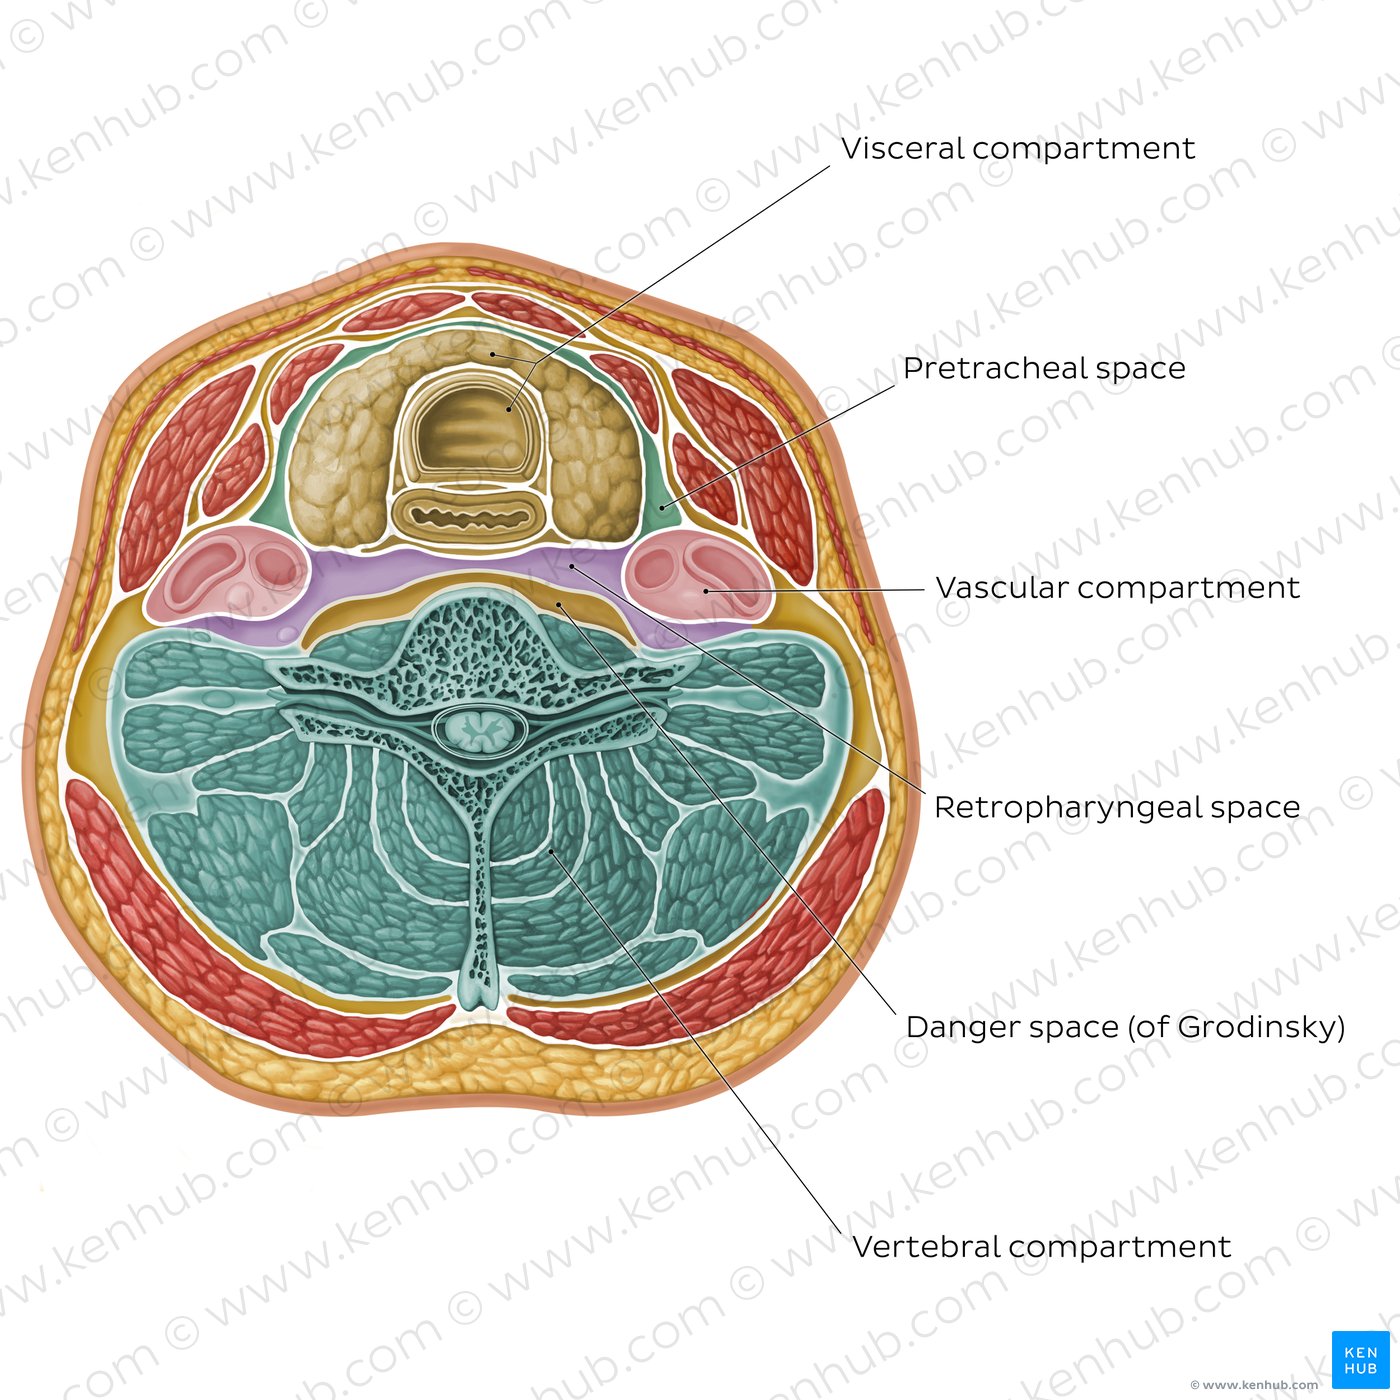 Compartments of the neck